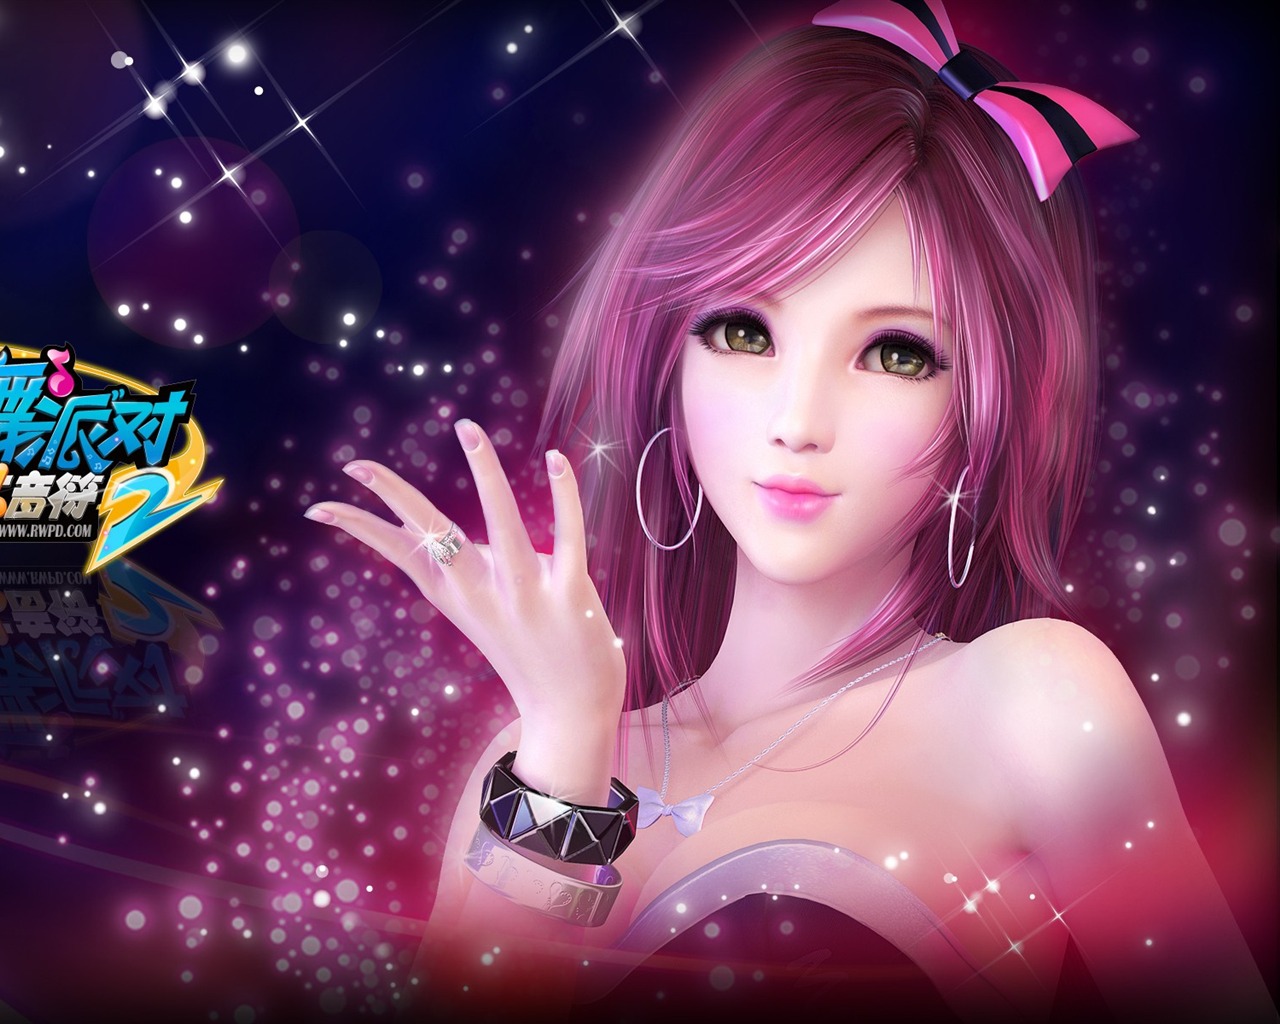 Online game Hot Dance Party II official wallpapers #26 - 1280x1024